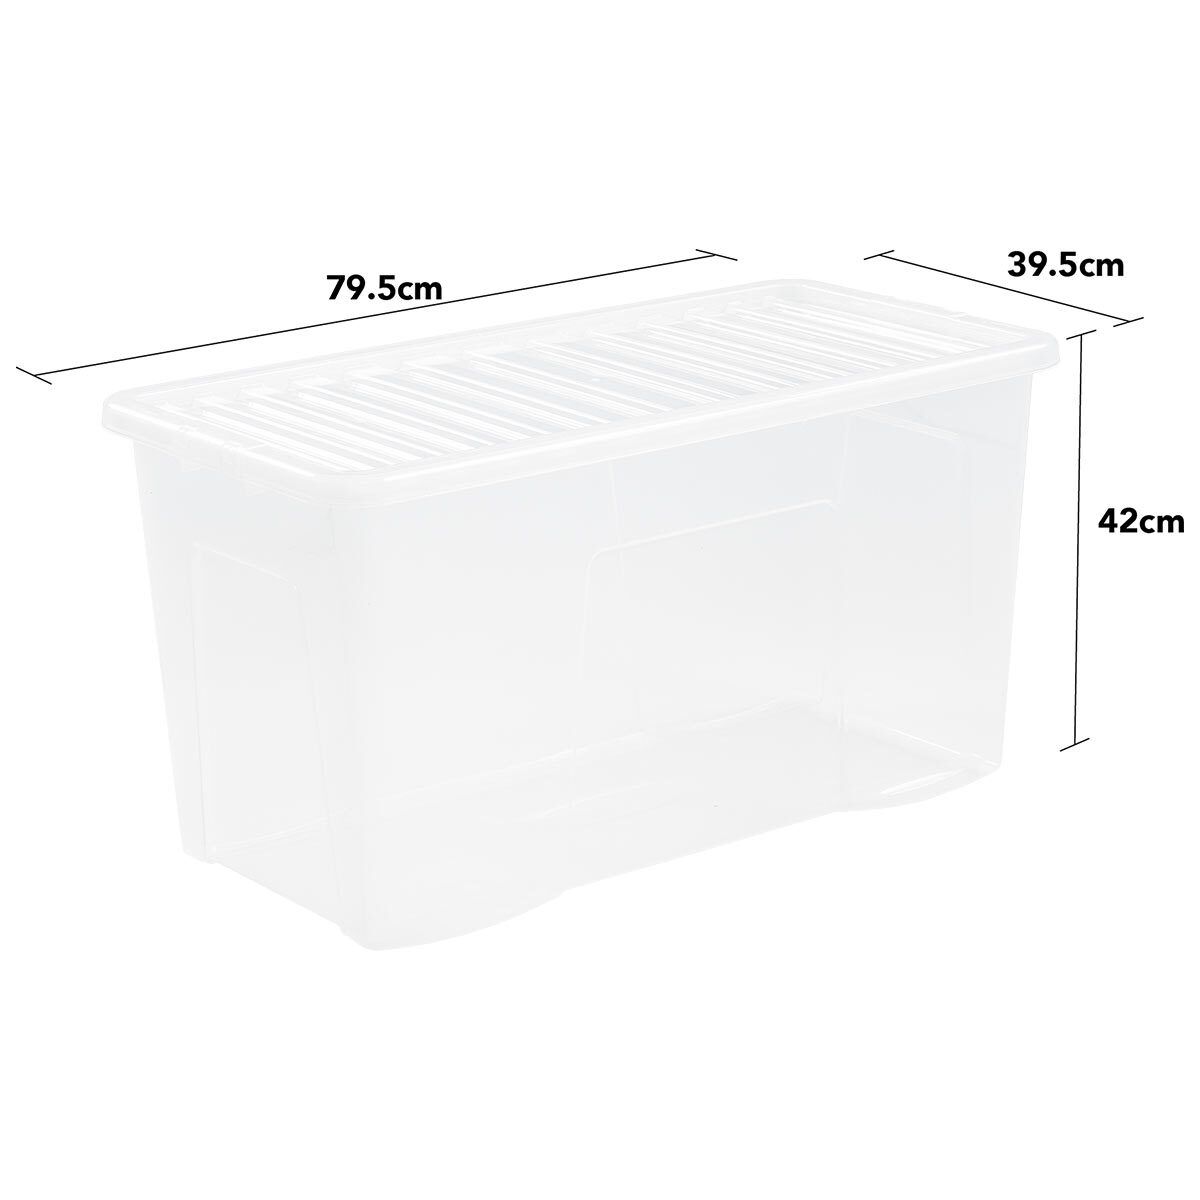 Cut out image of box on white background with dimensions